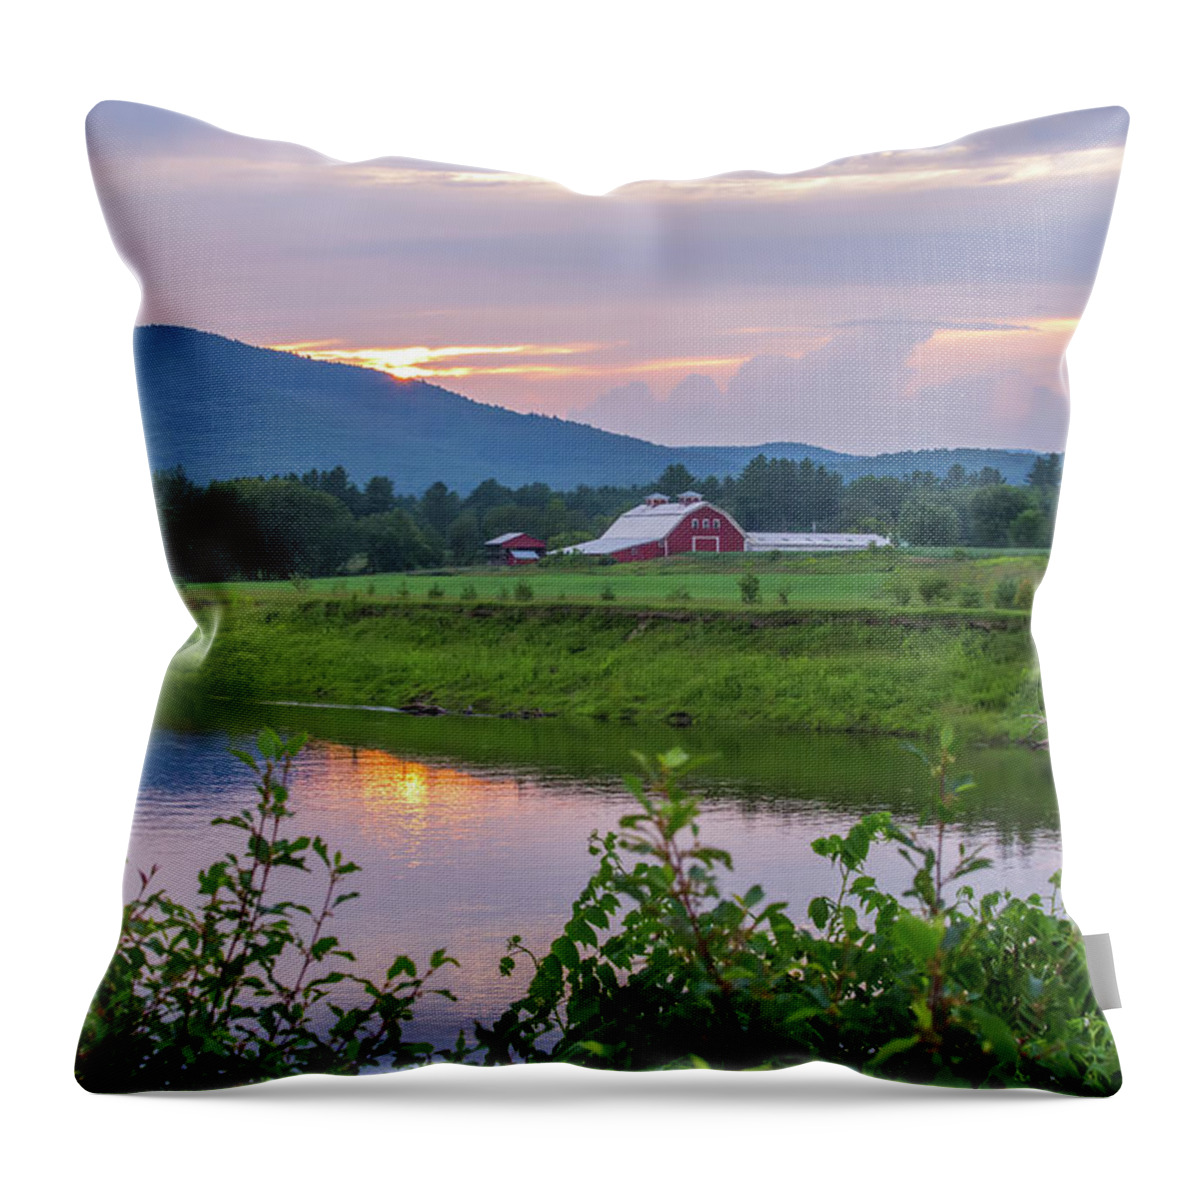 North Throw Pillow featuring the photograph North Country Barn Sunset by Chris Whiton